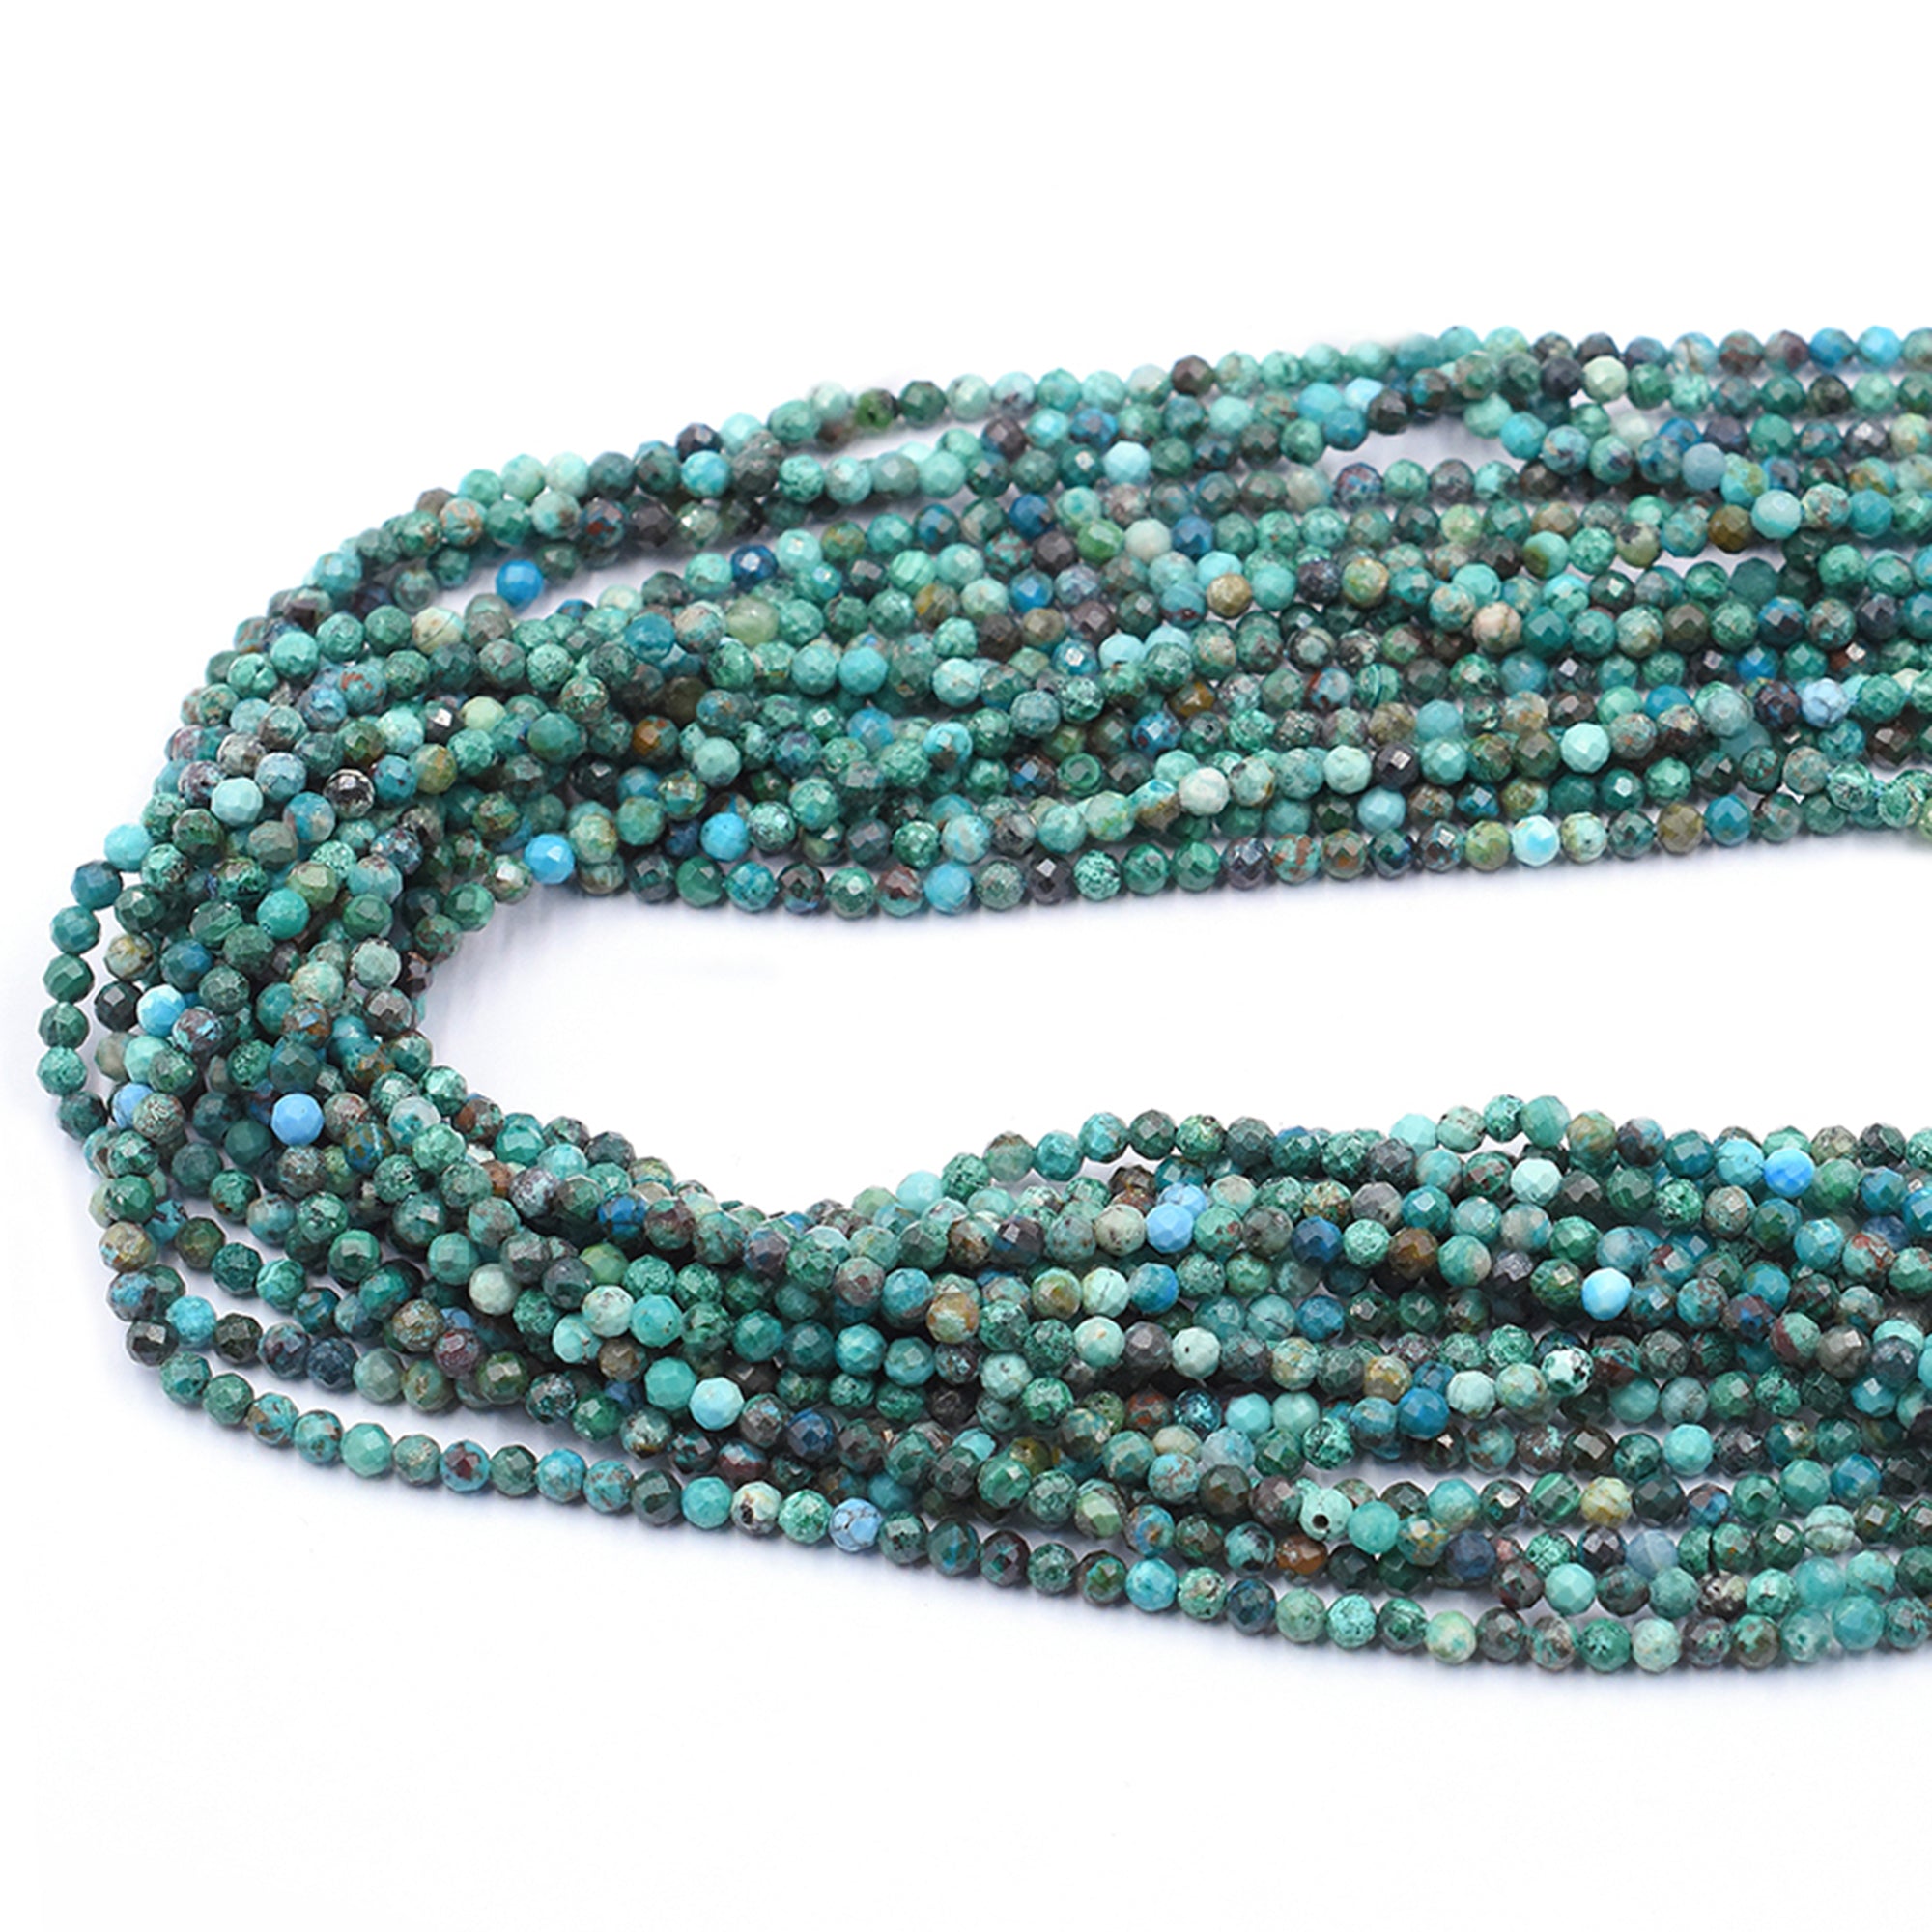 Azurite Malachite 3 MM Faceted Rondelle Shape Beads Strand